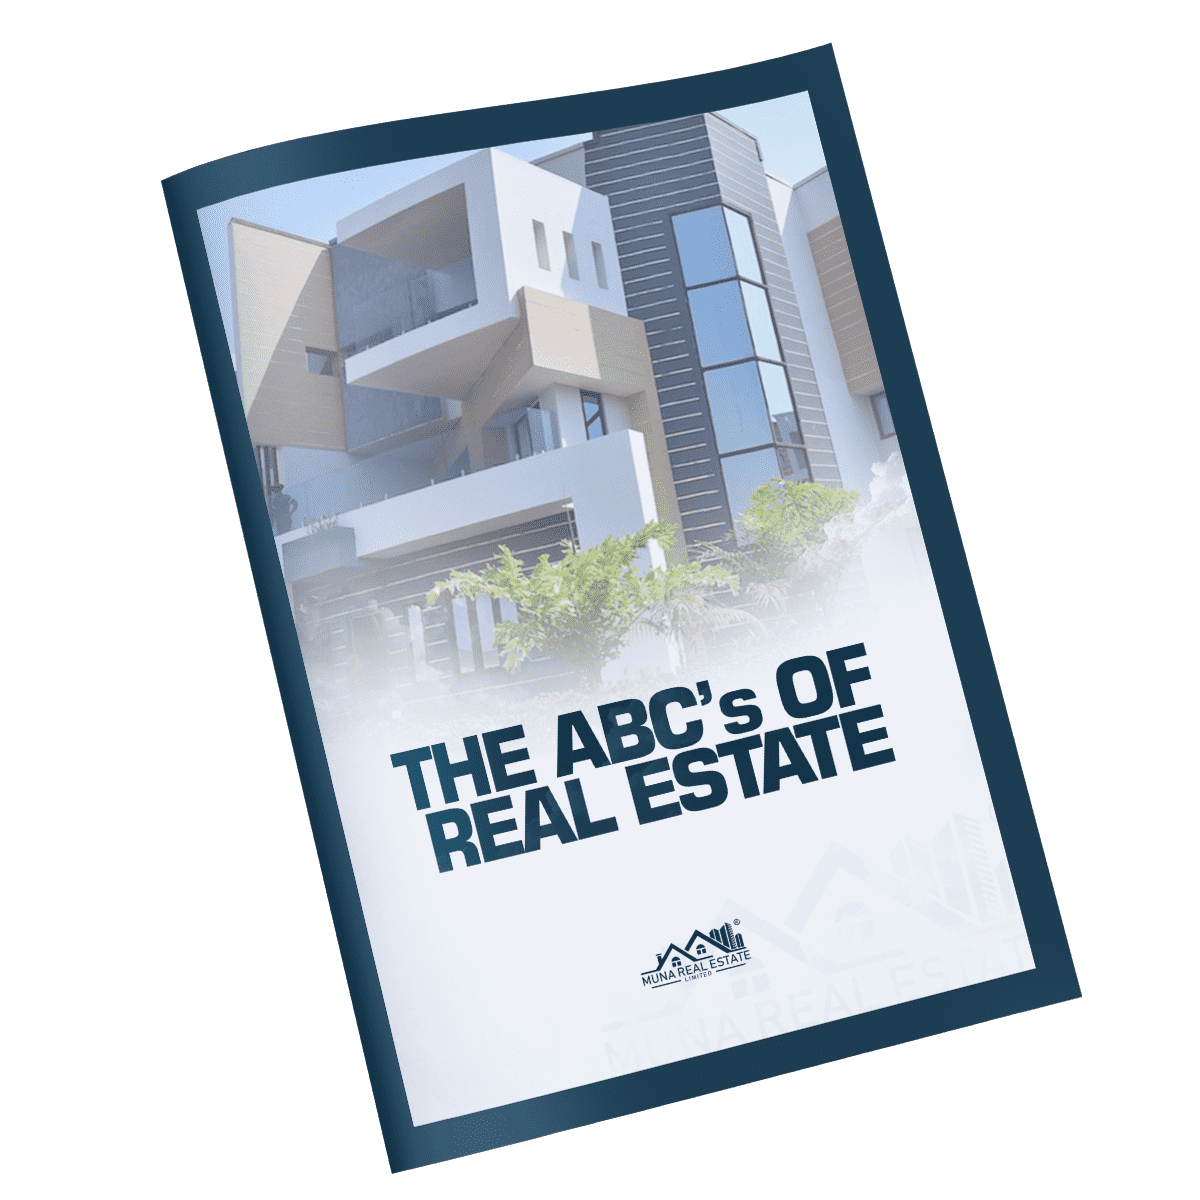 The ABCs of real estate